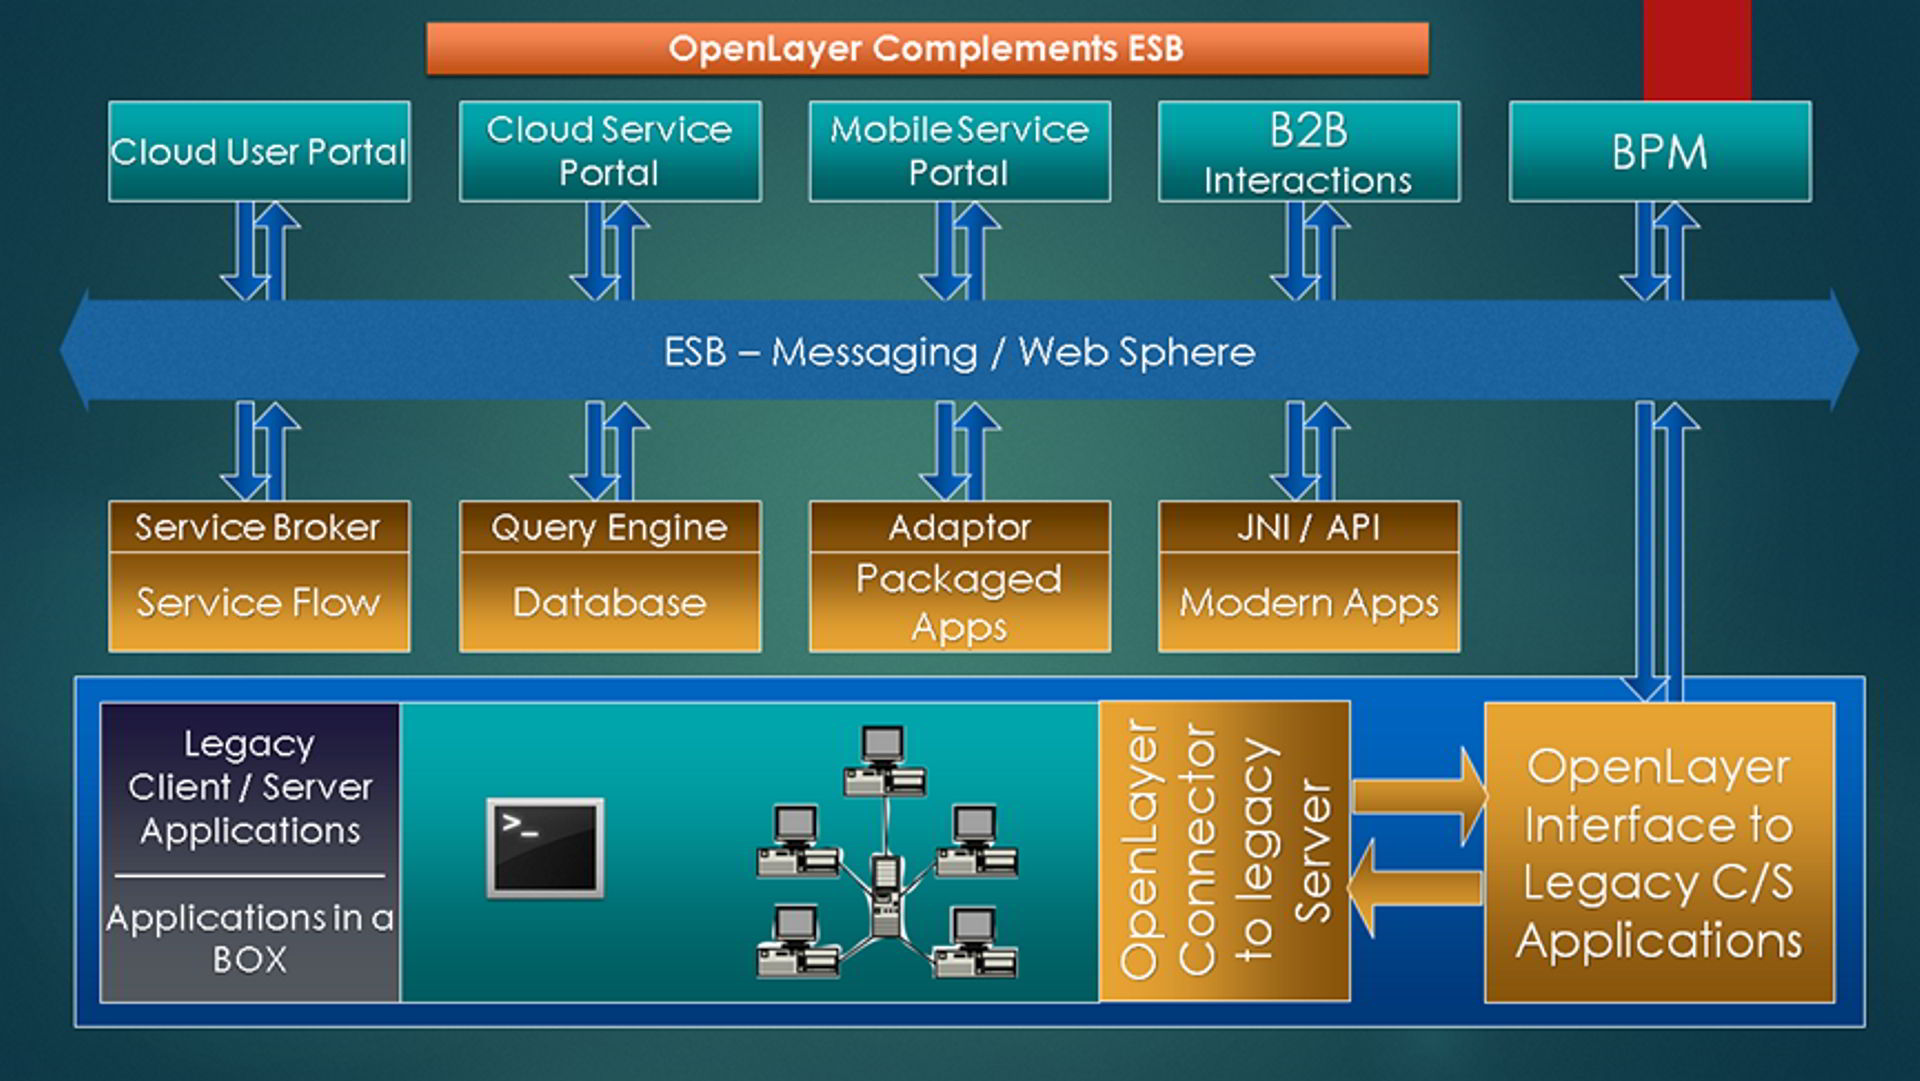 OpenLayer, ESB Messaging | Web Sphere